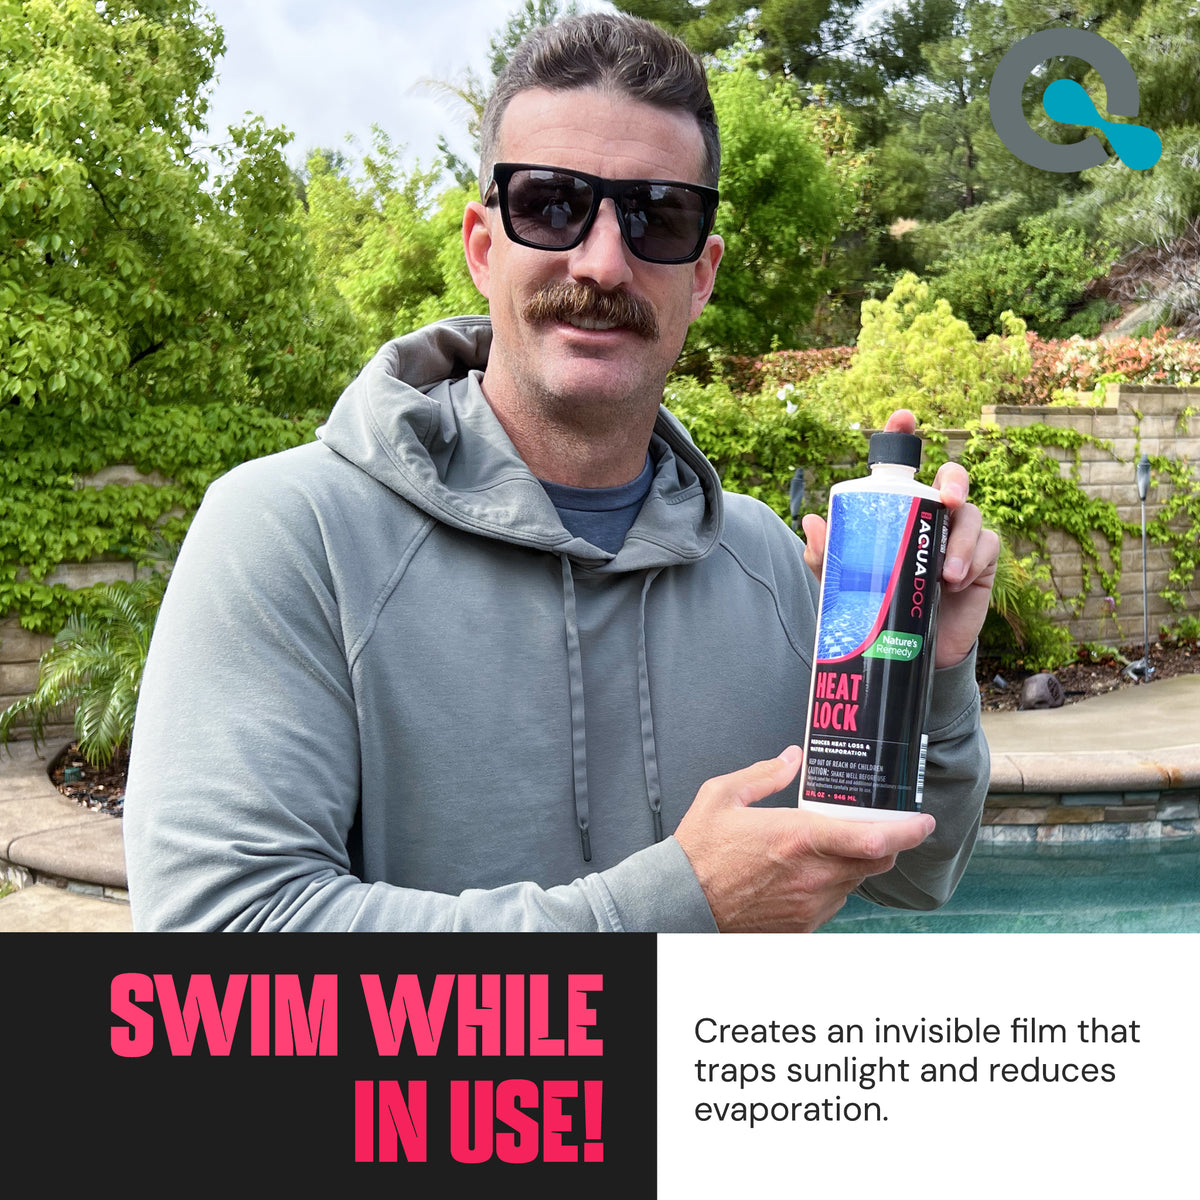 Reduce Heat Loss and Save Water with AquaDoc's Pool Heat Lock